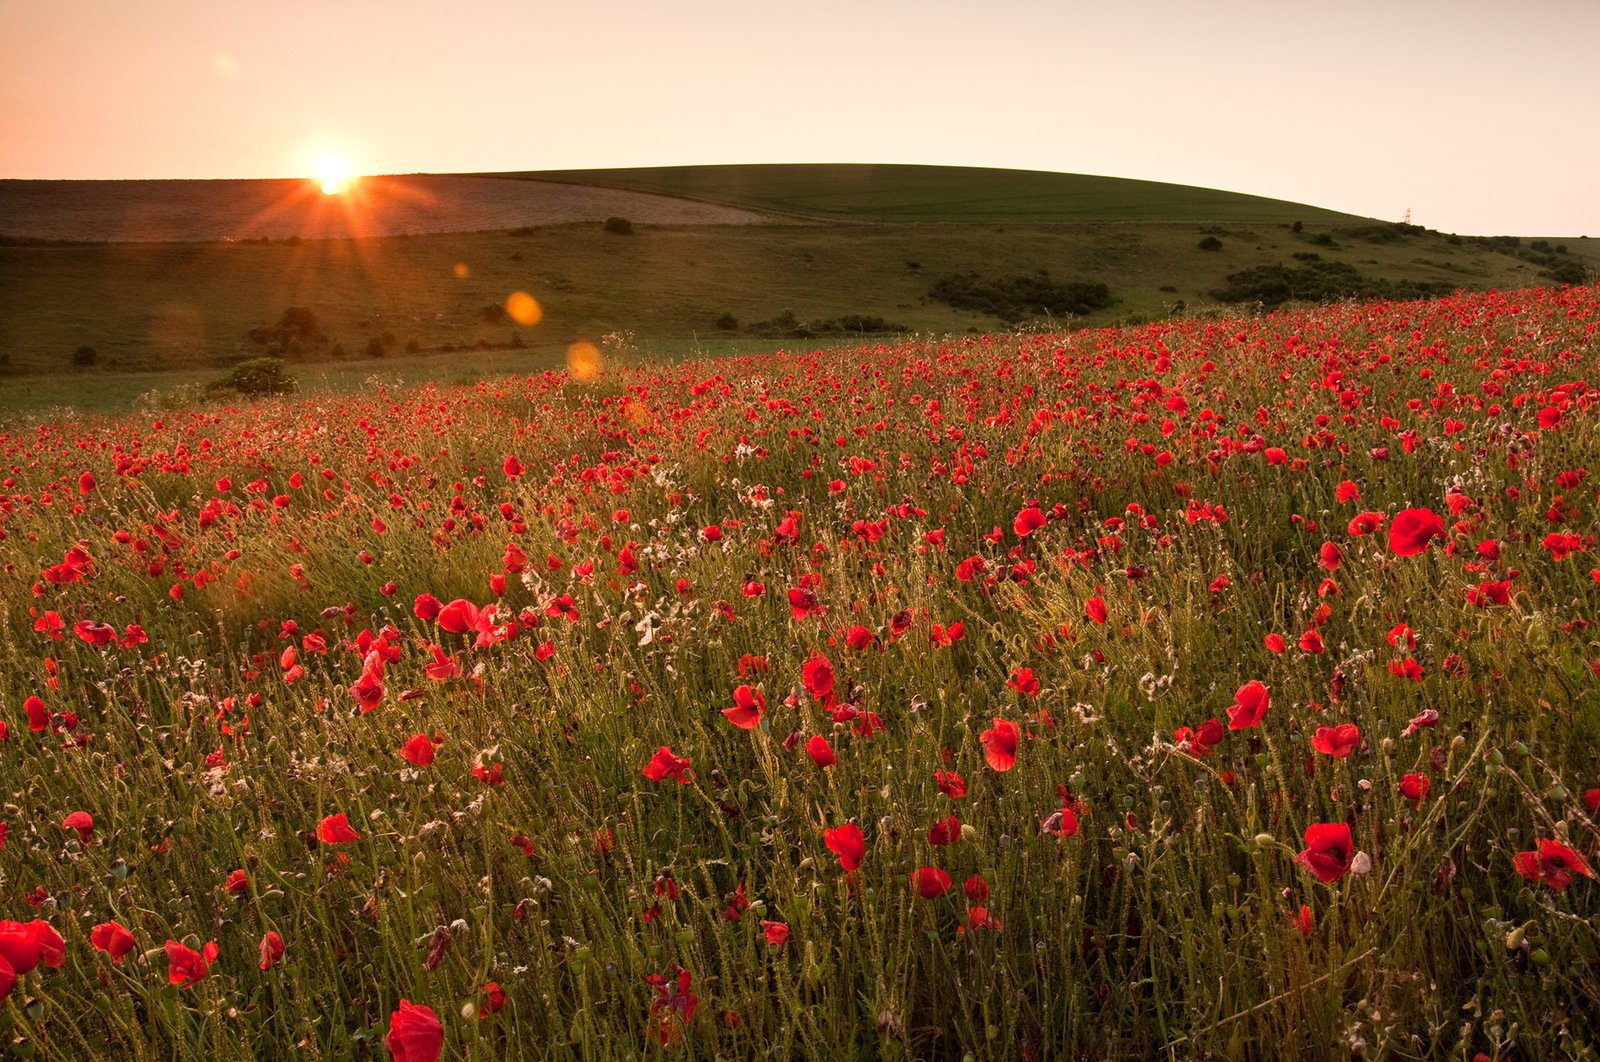 Tips for Taking Beautiful Summertime Landscape Photos